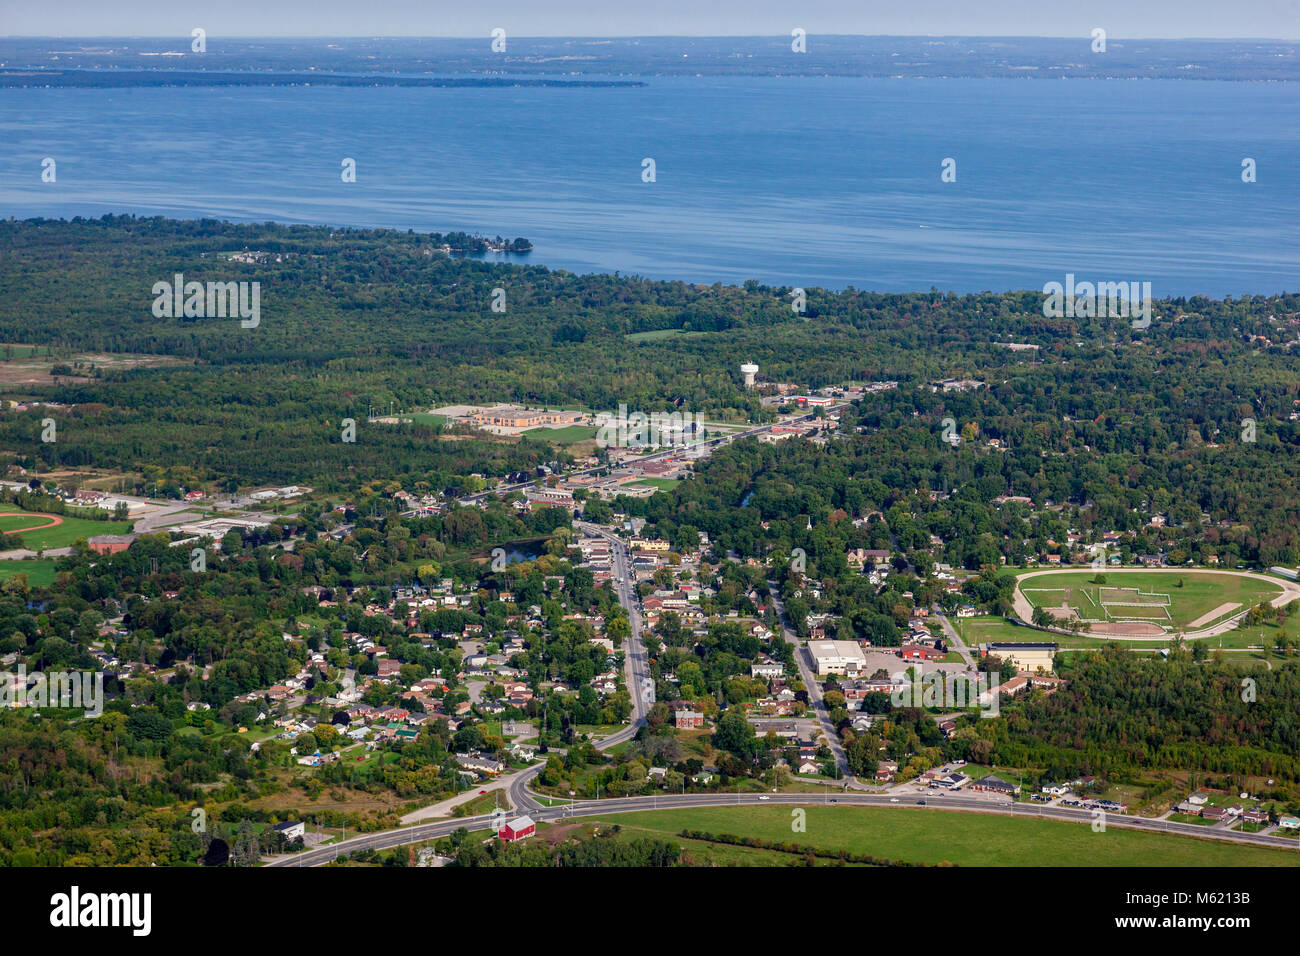 An aerial view of the town of Sutton on lake Simcoe. Stock Photo